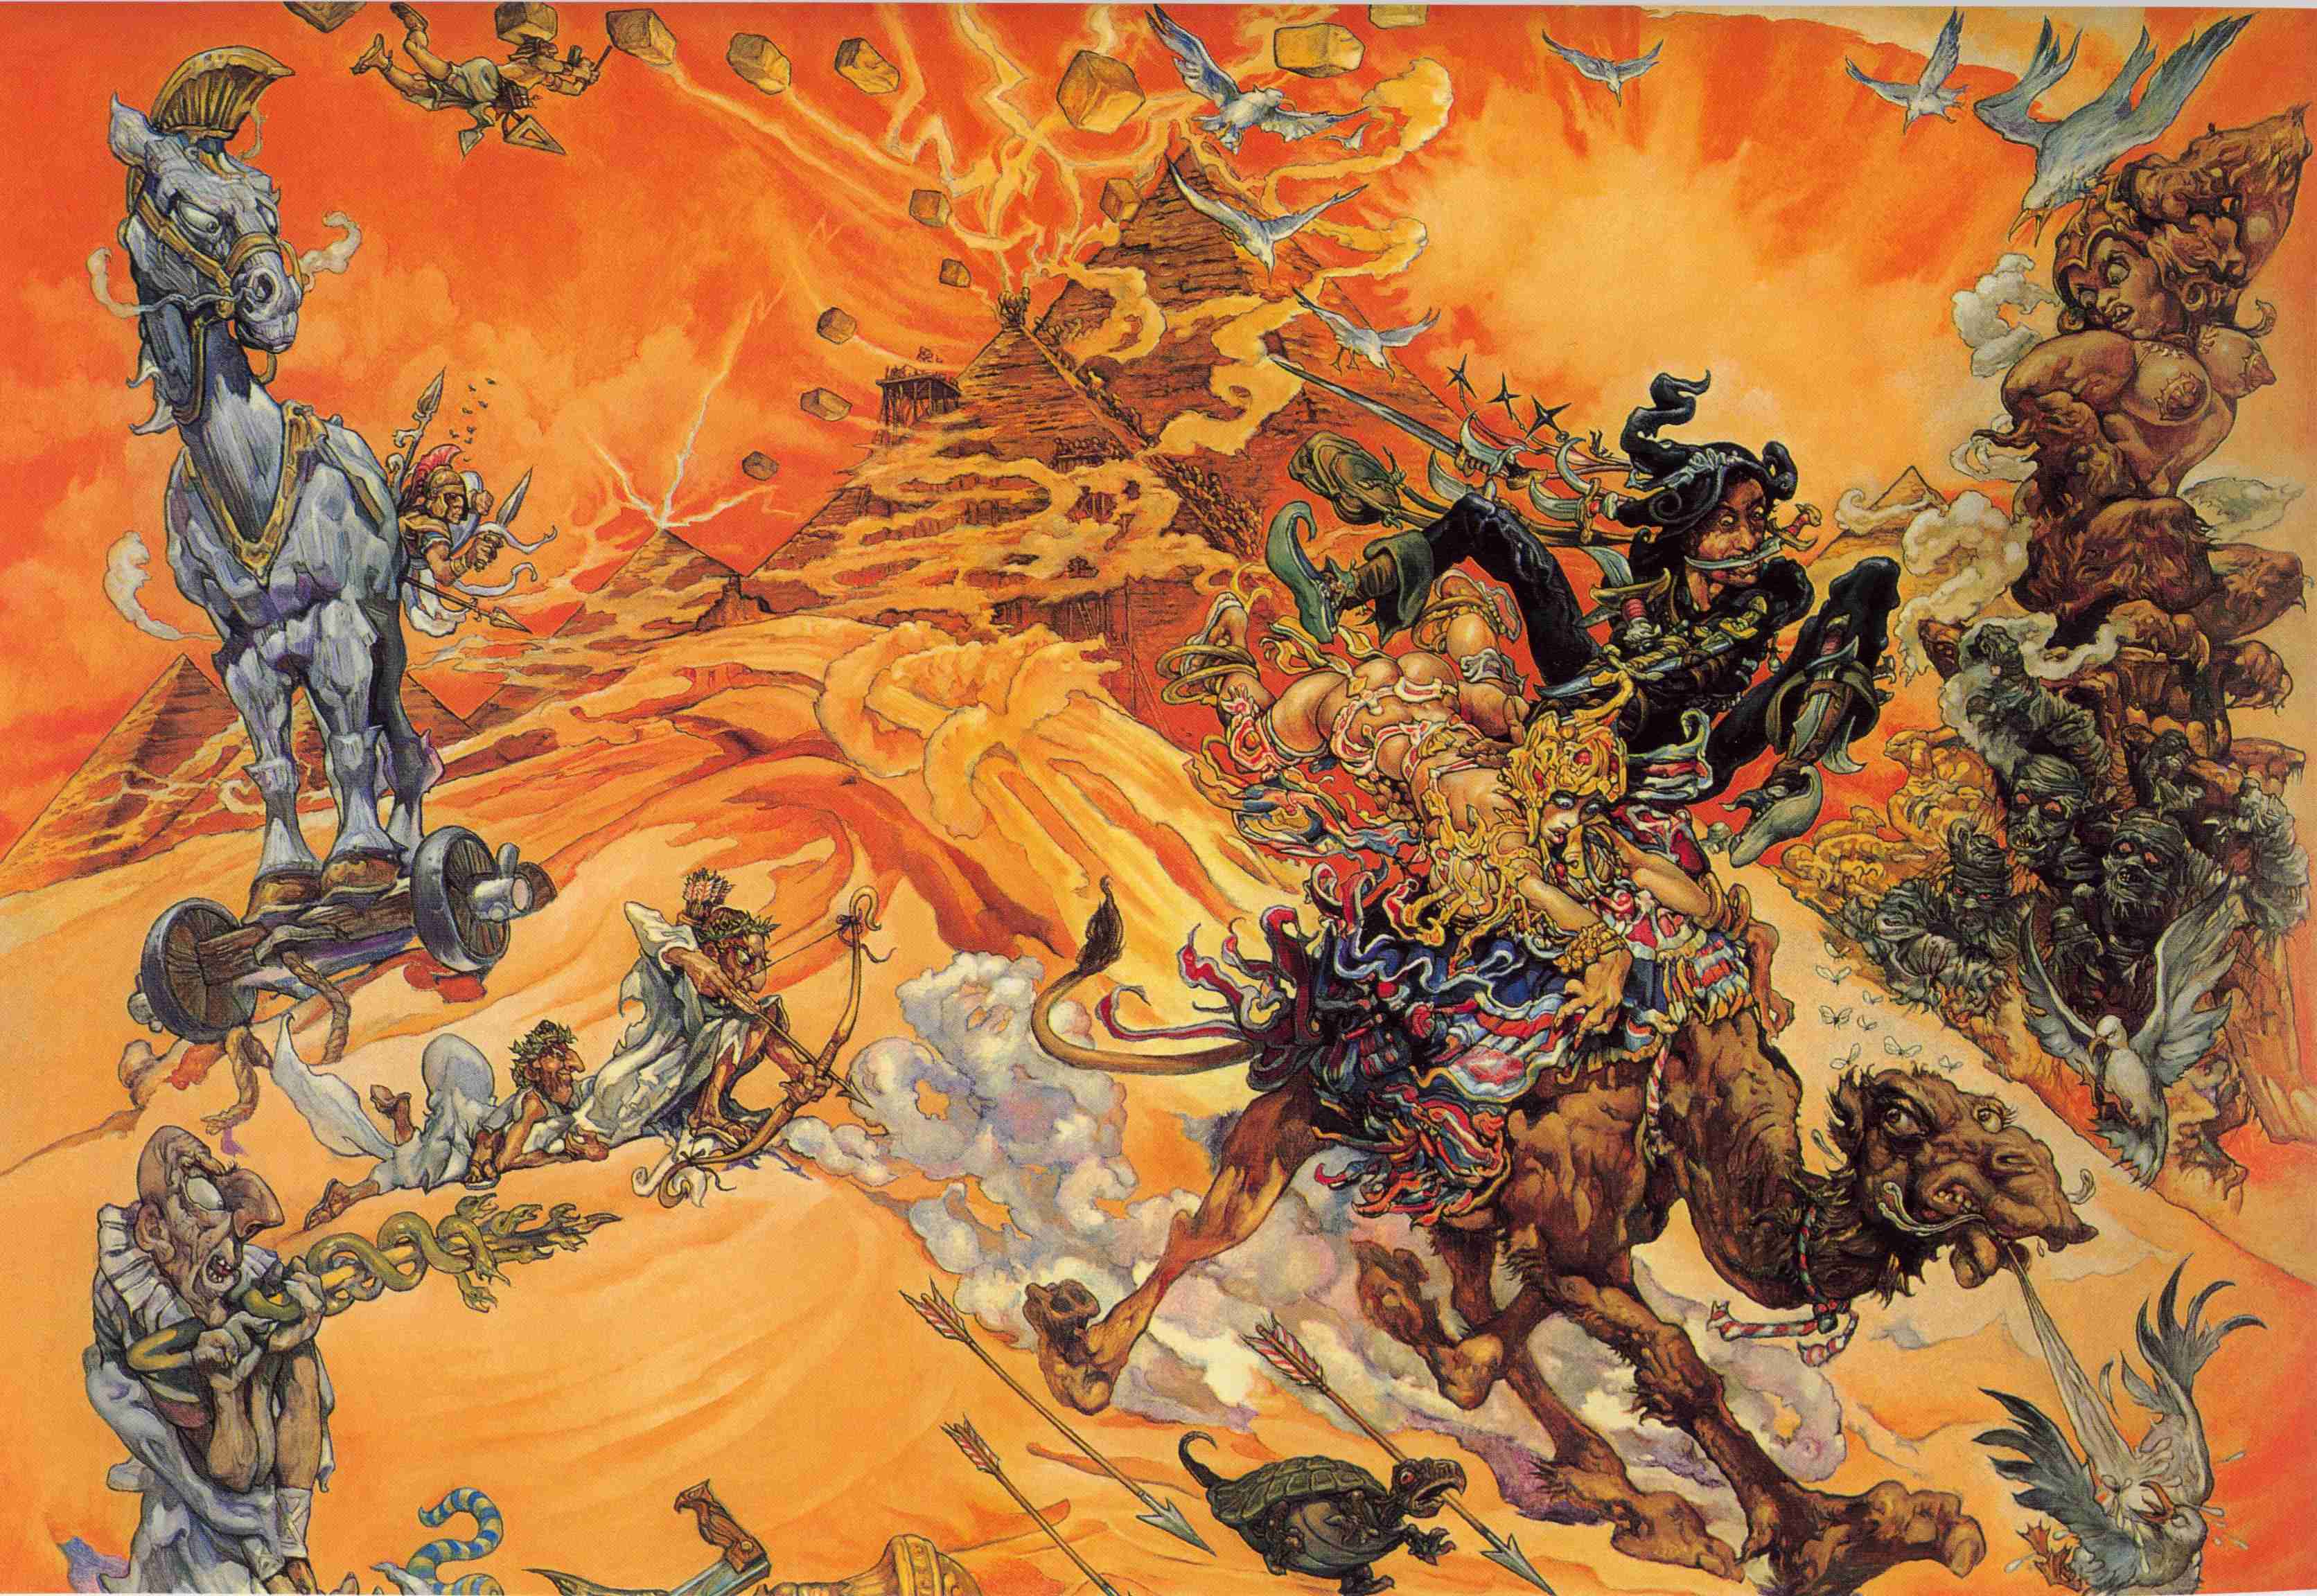 Your Favourite Josh Kirby Discworld Cover – The Result – The Art of  Discworld